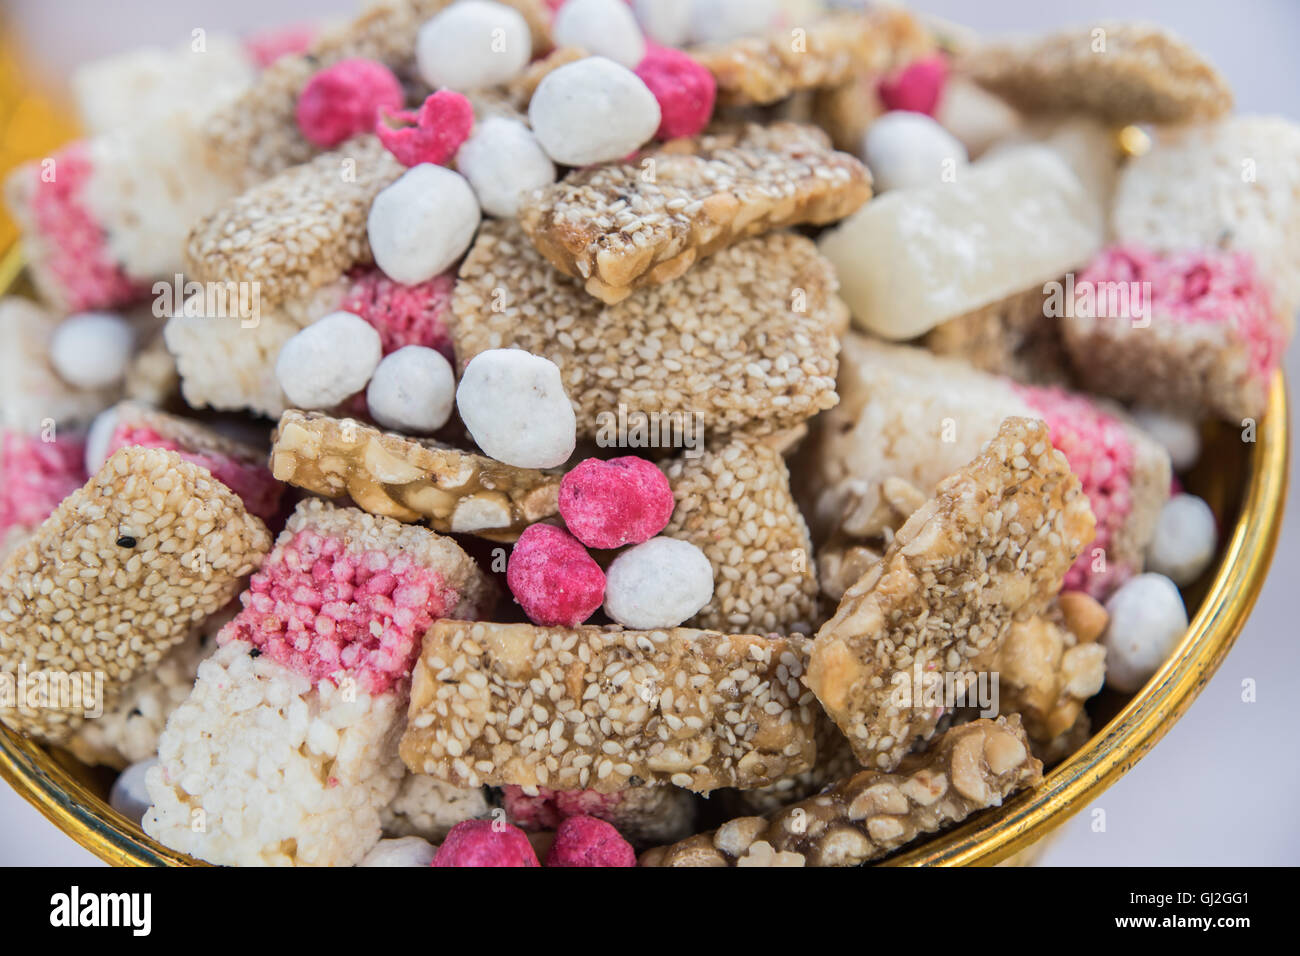 Candy comfit, Chinese sweetmeat made of many ingredients Stock Photo